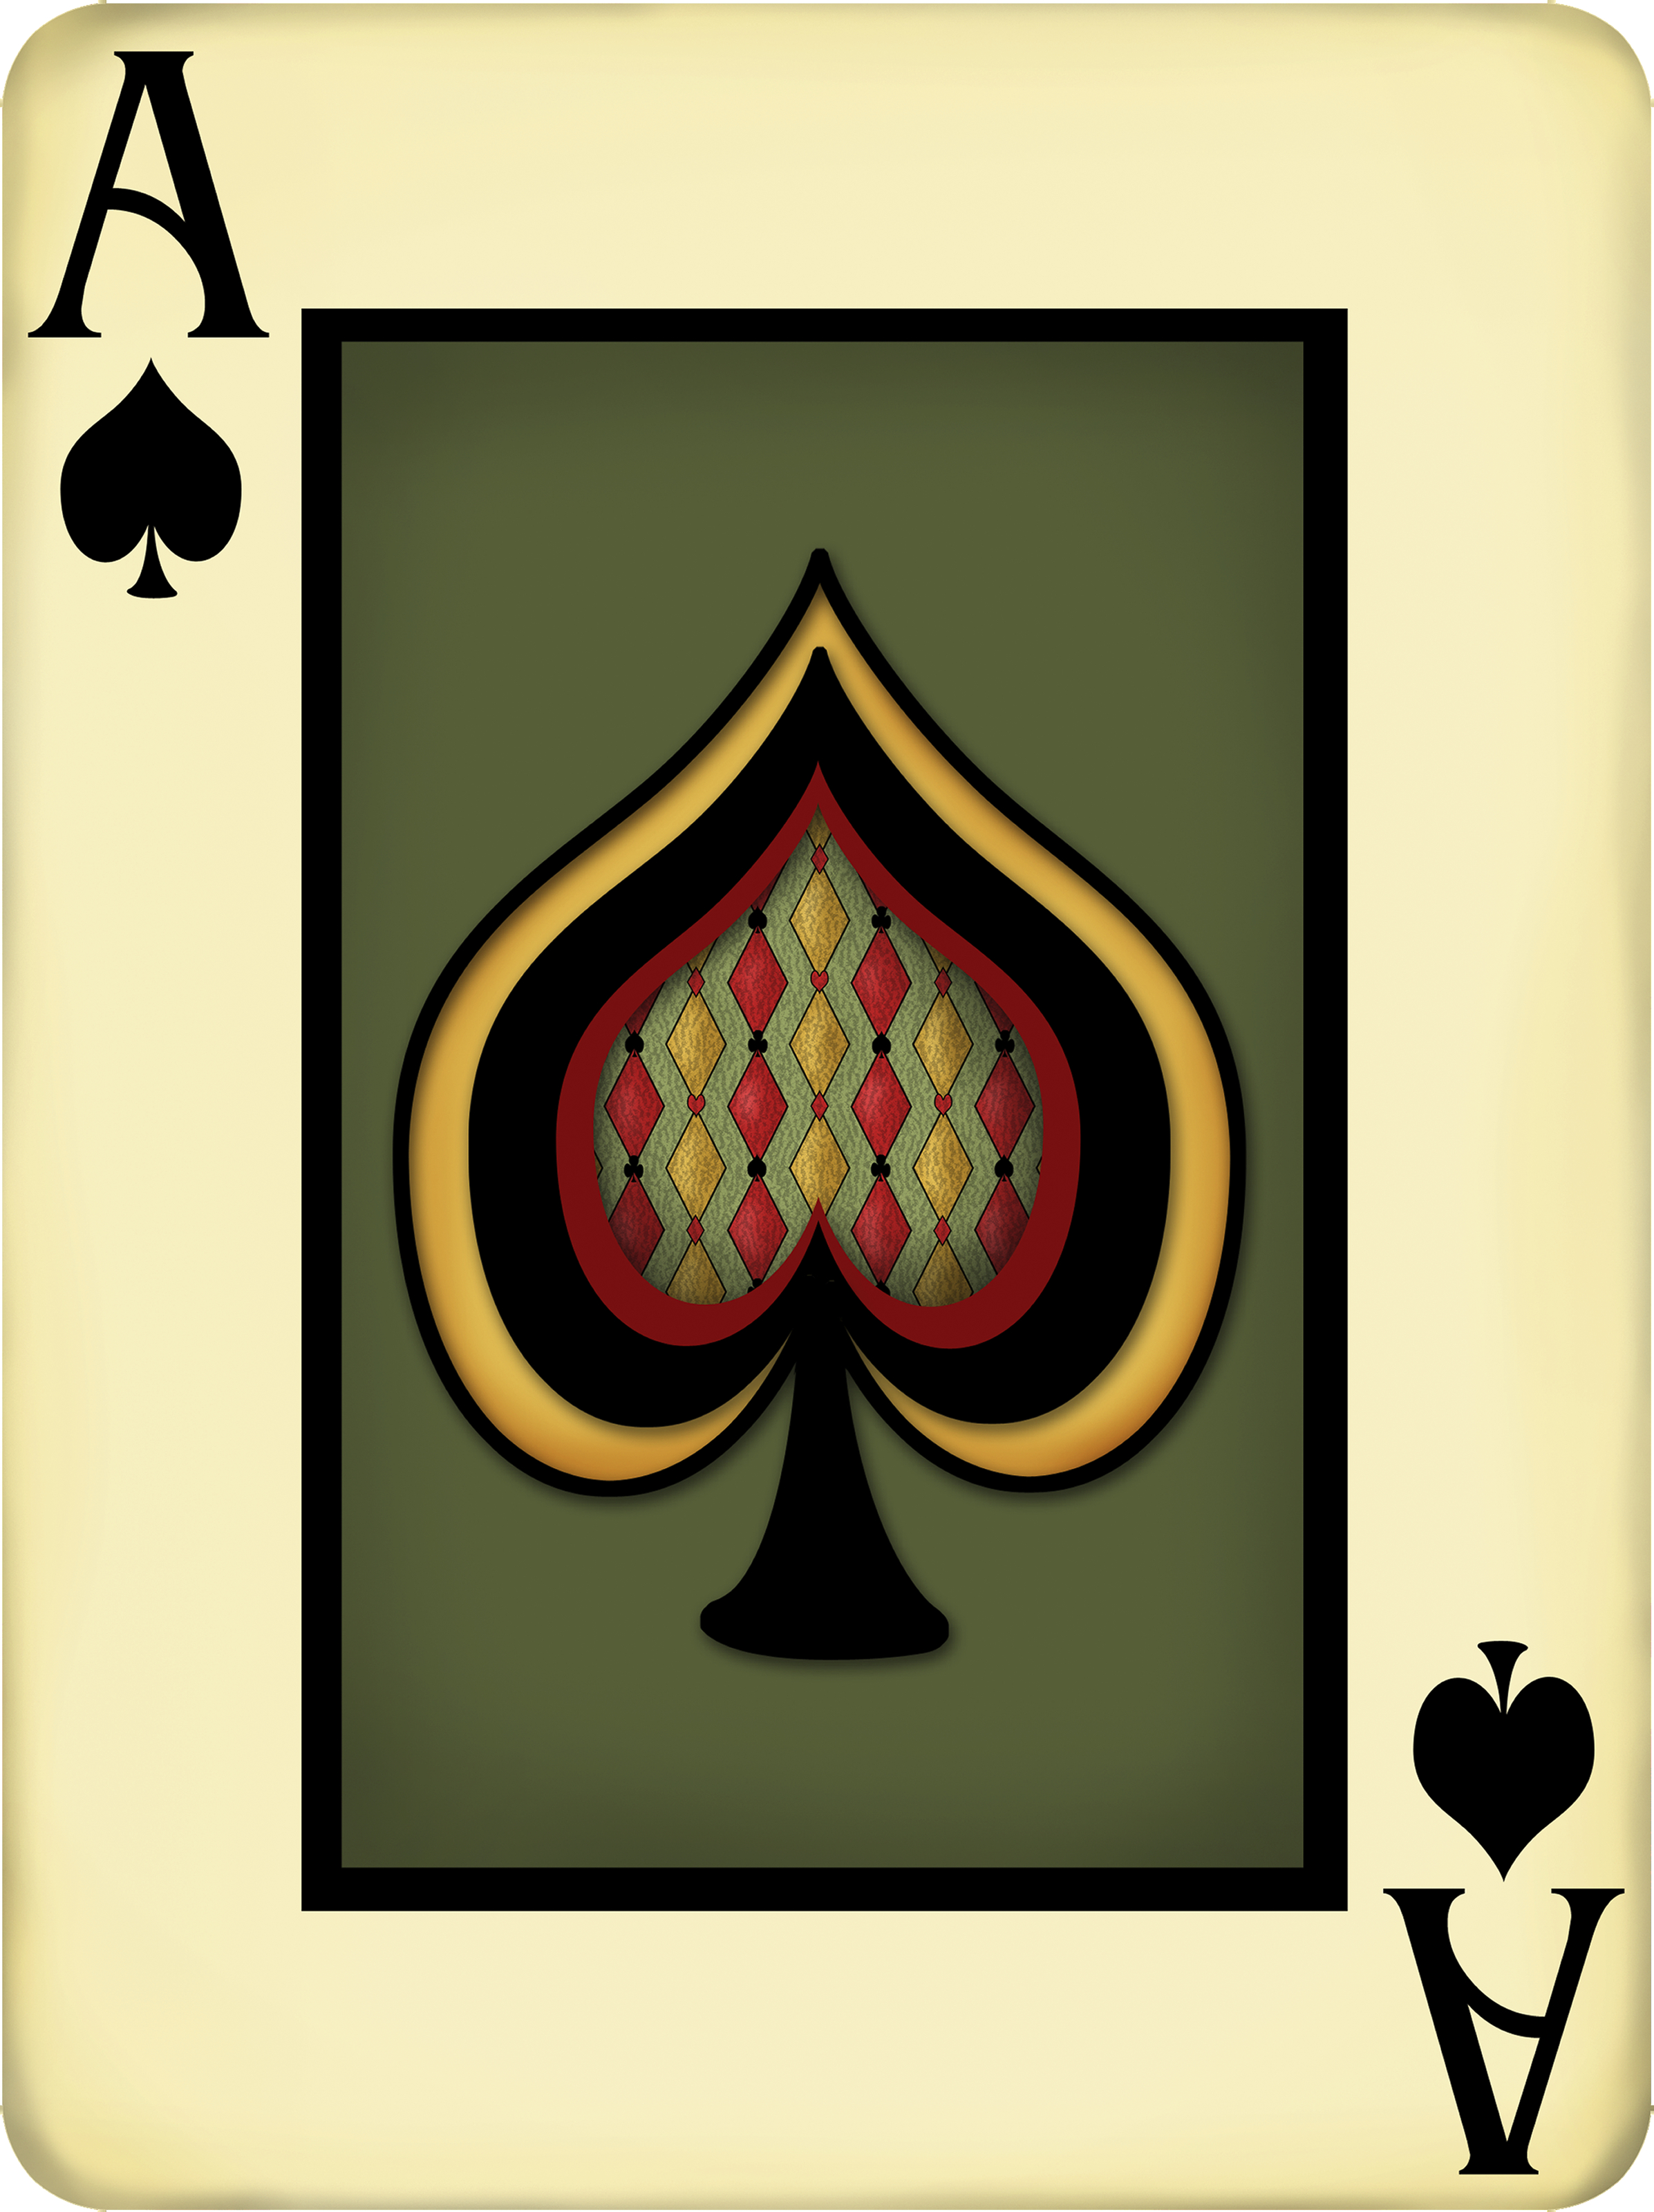 Ace of spades poker card on antique background detailed